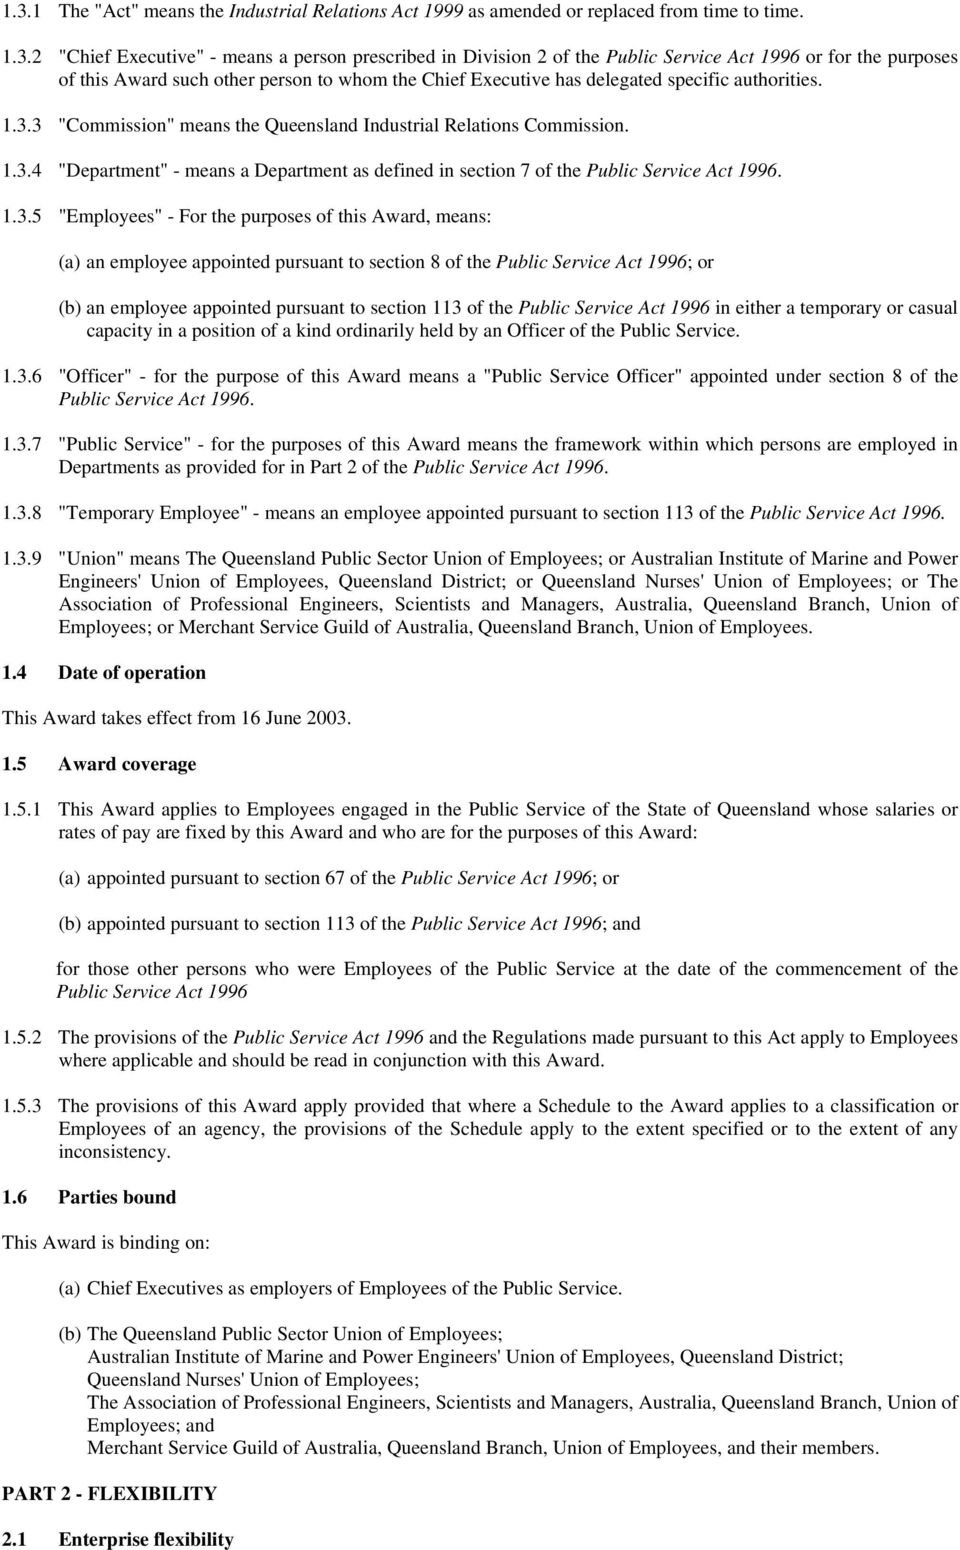 3 "Commission" means the Queensland Industrial Relations Commission. 1.3.4 "Department" - means a Department as defined in section 7 of the Public Service Act 1996. 1.3.5 "Employees" - For the